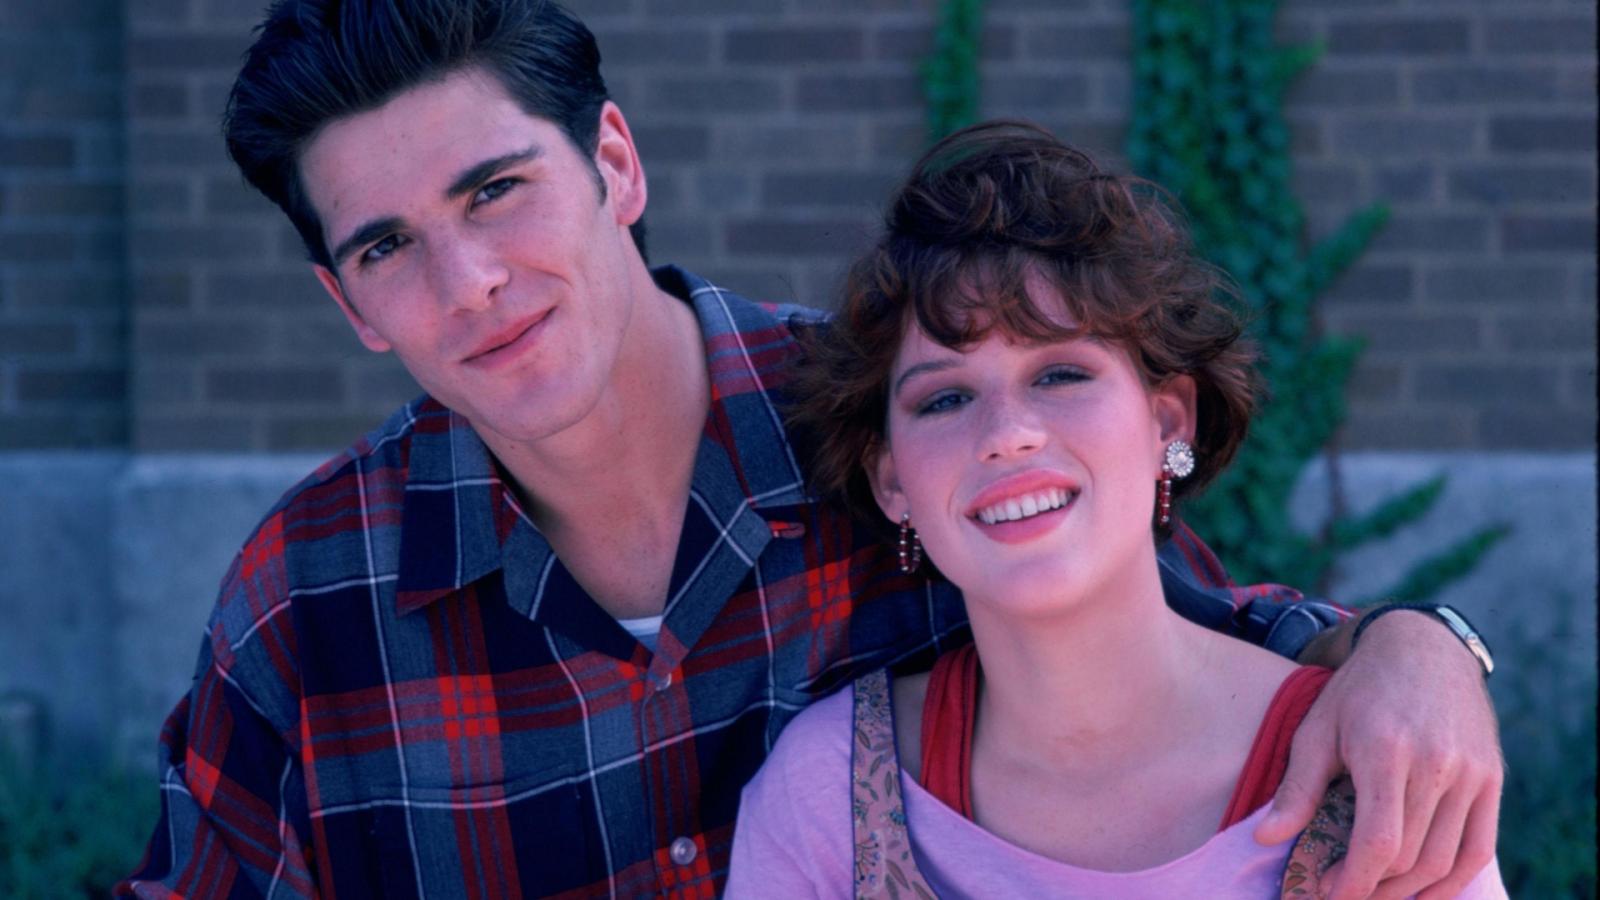 15 Coming-of-Age Movies that Defined the 80s - image 6